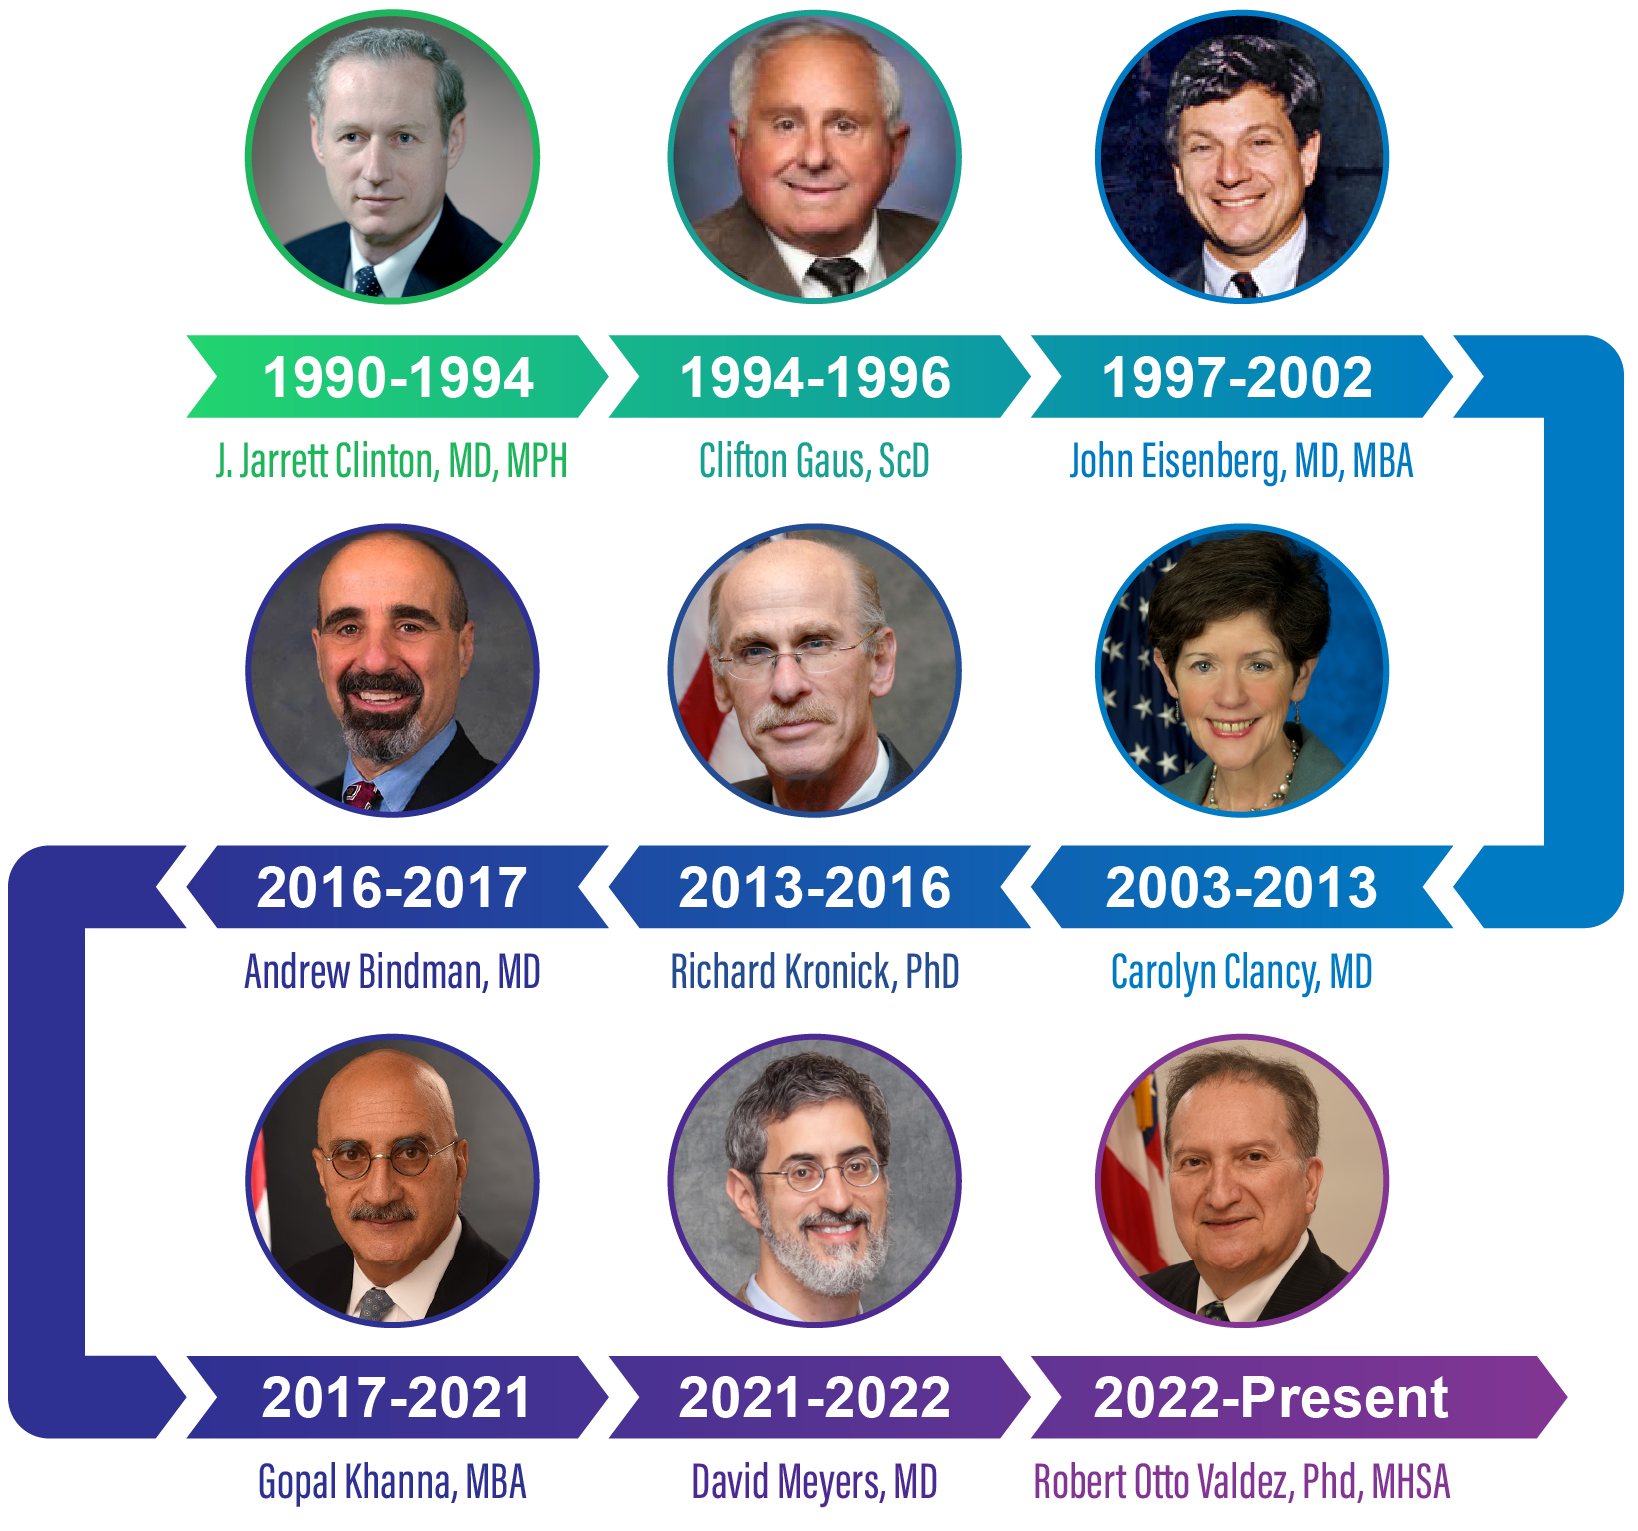 Timeline of AHRQ Leadership, with photos of each leader. Dates and information on each noted below.